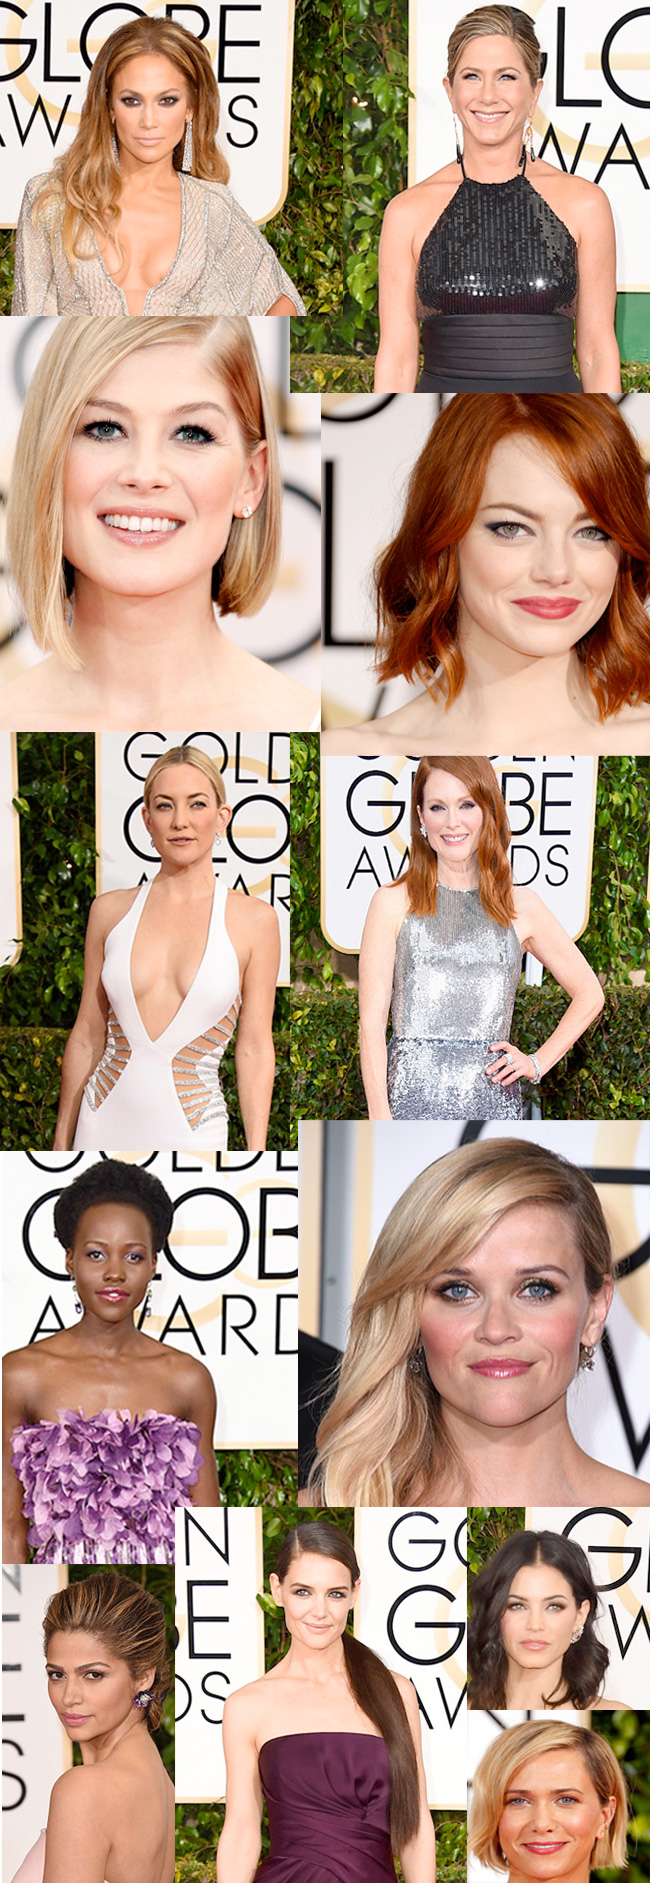 Top 12 Beauty Looks from the 2015 Golden Globe Awards. Complete hair and makeup breakdowns straight from the celebrity makeup artists and hairstylists that worked on the celebrities.